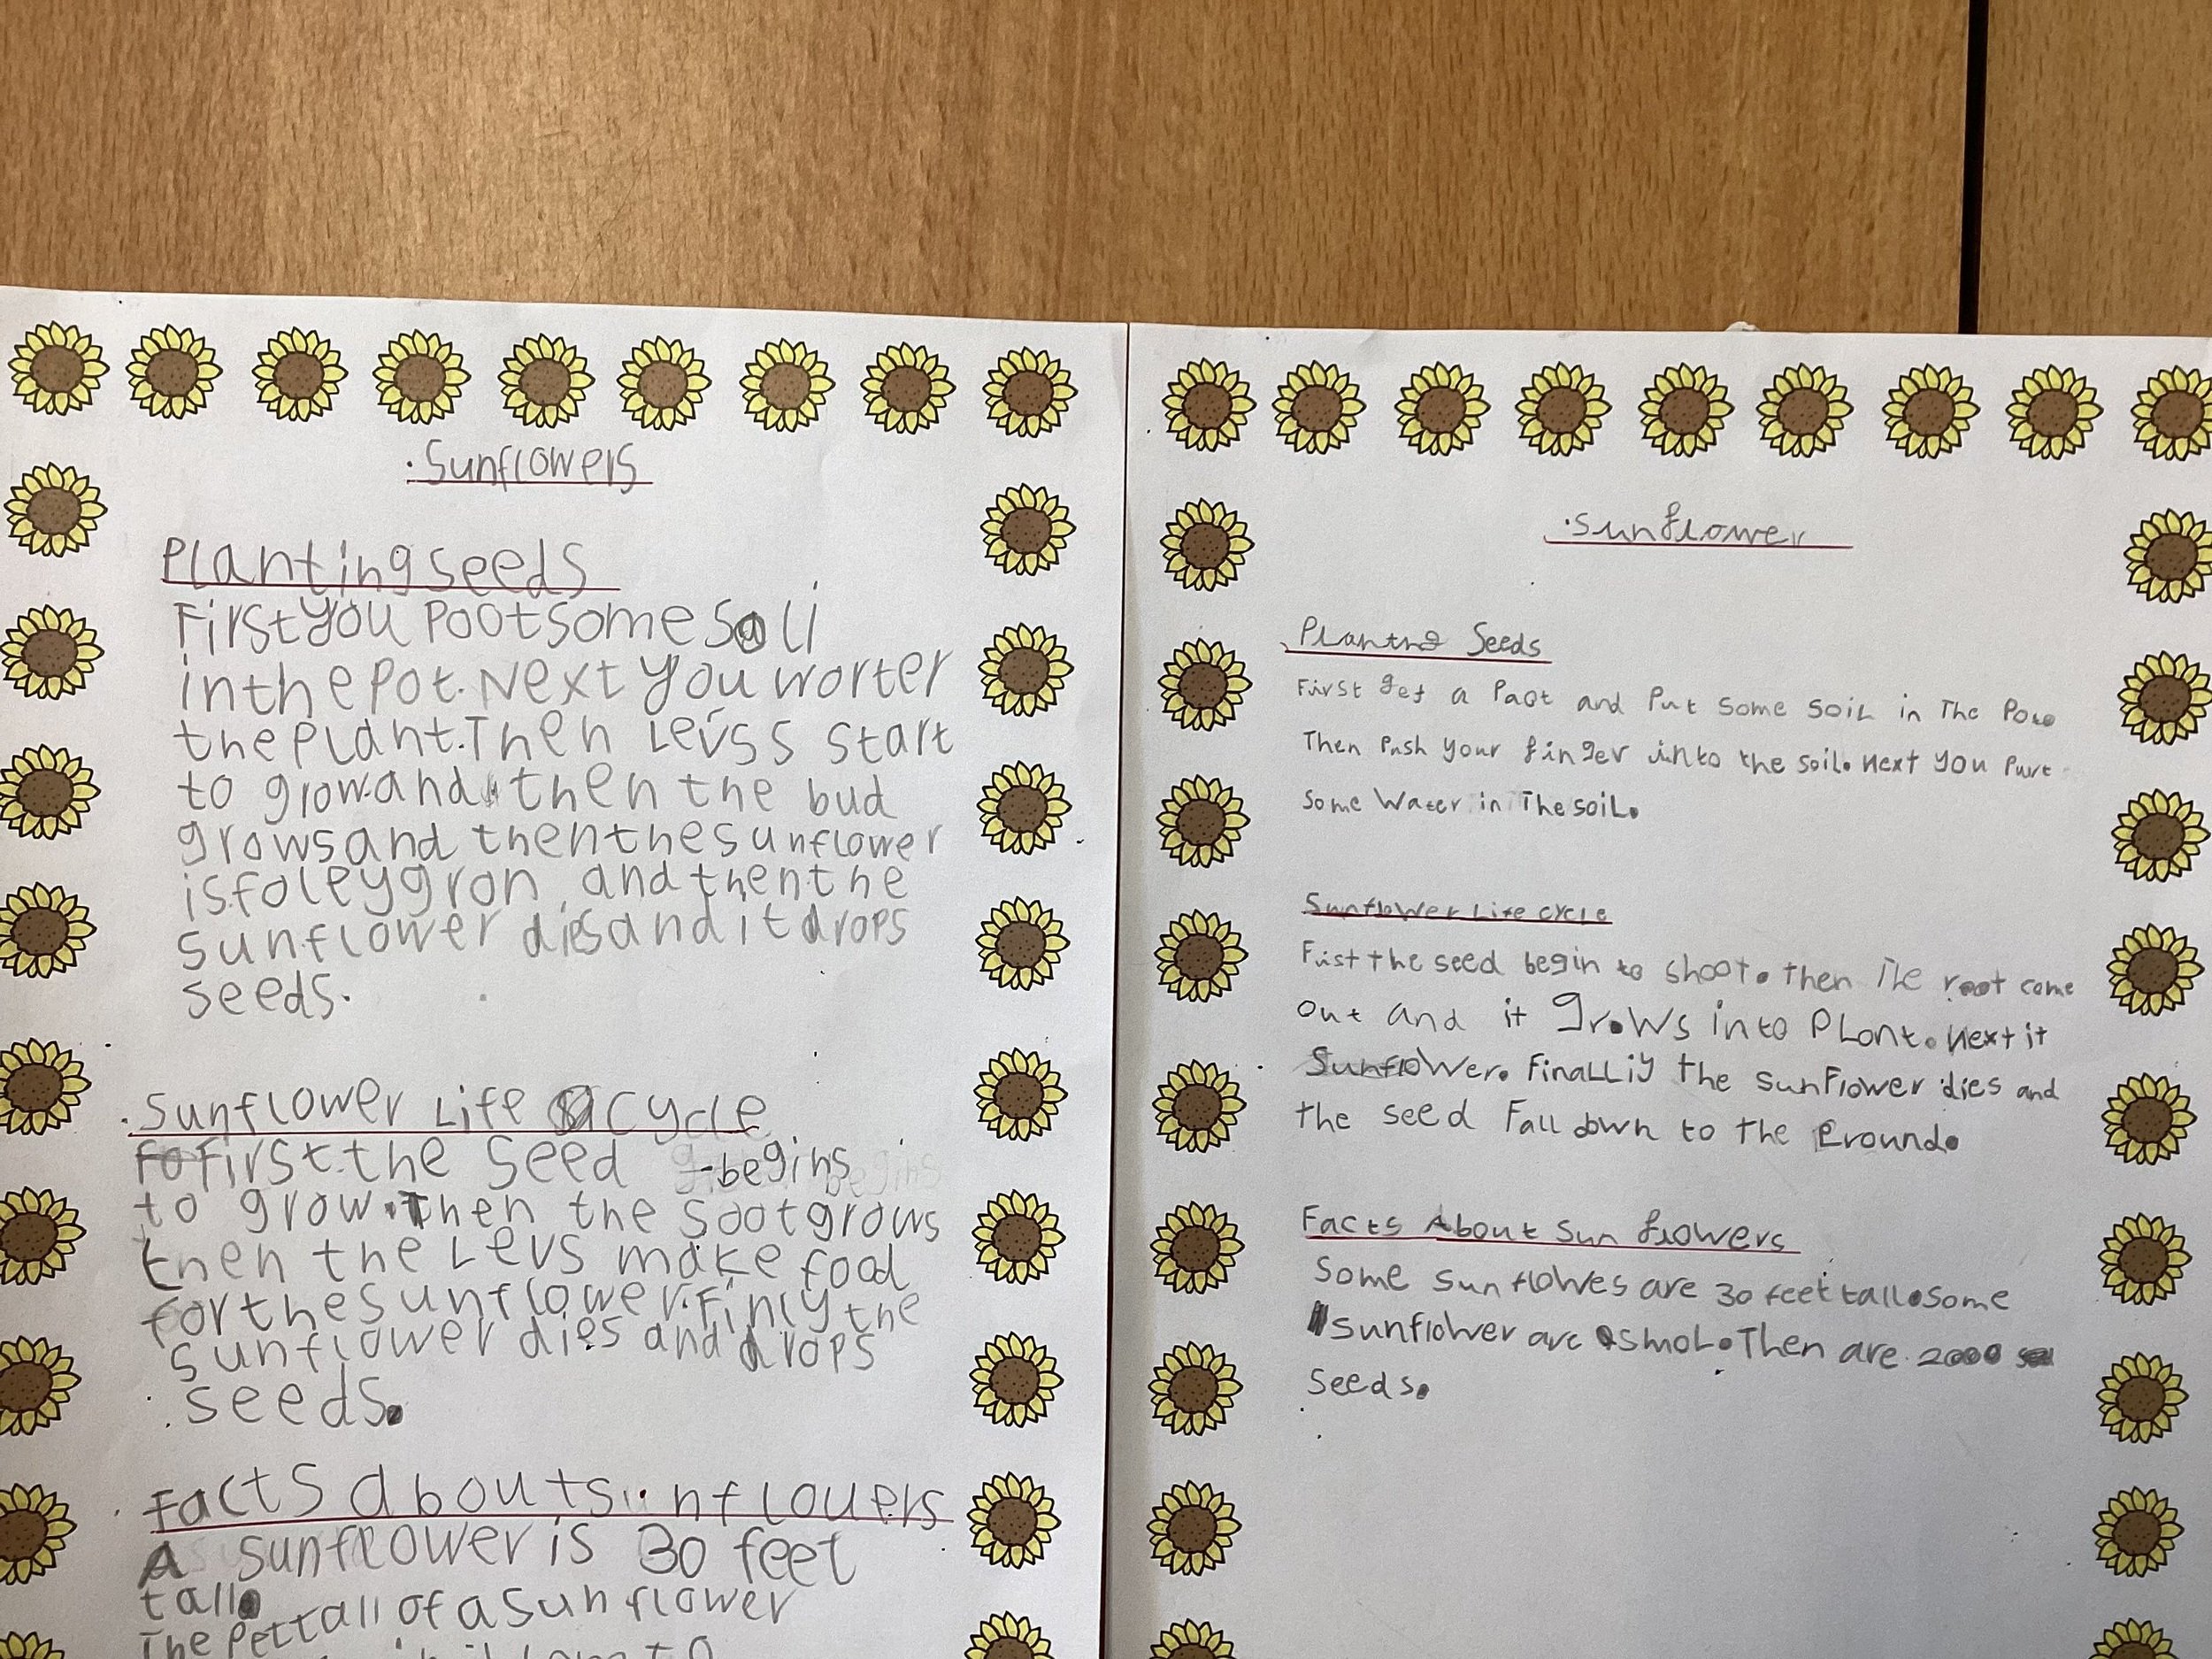 Literacy - Information About Sunflowers!